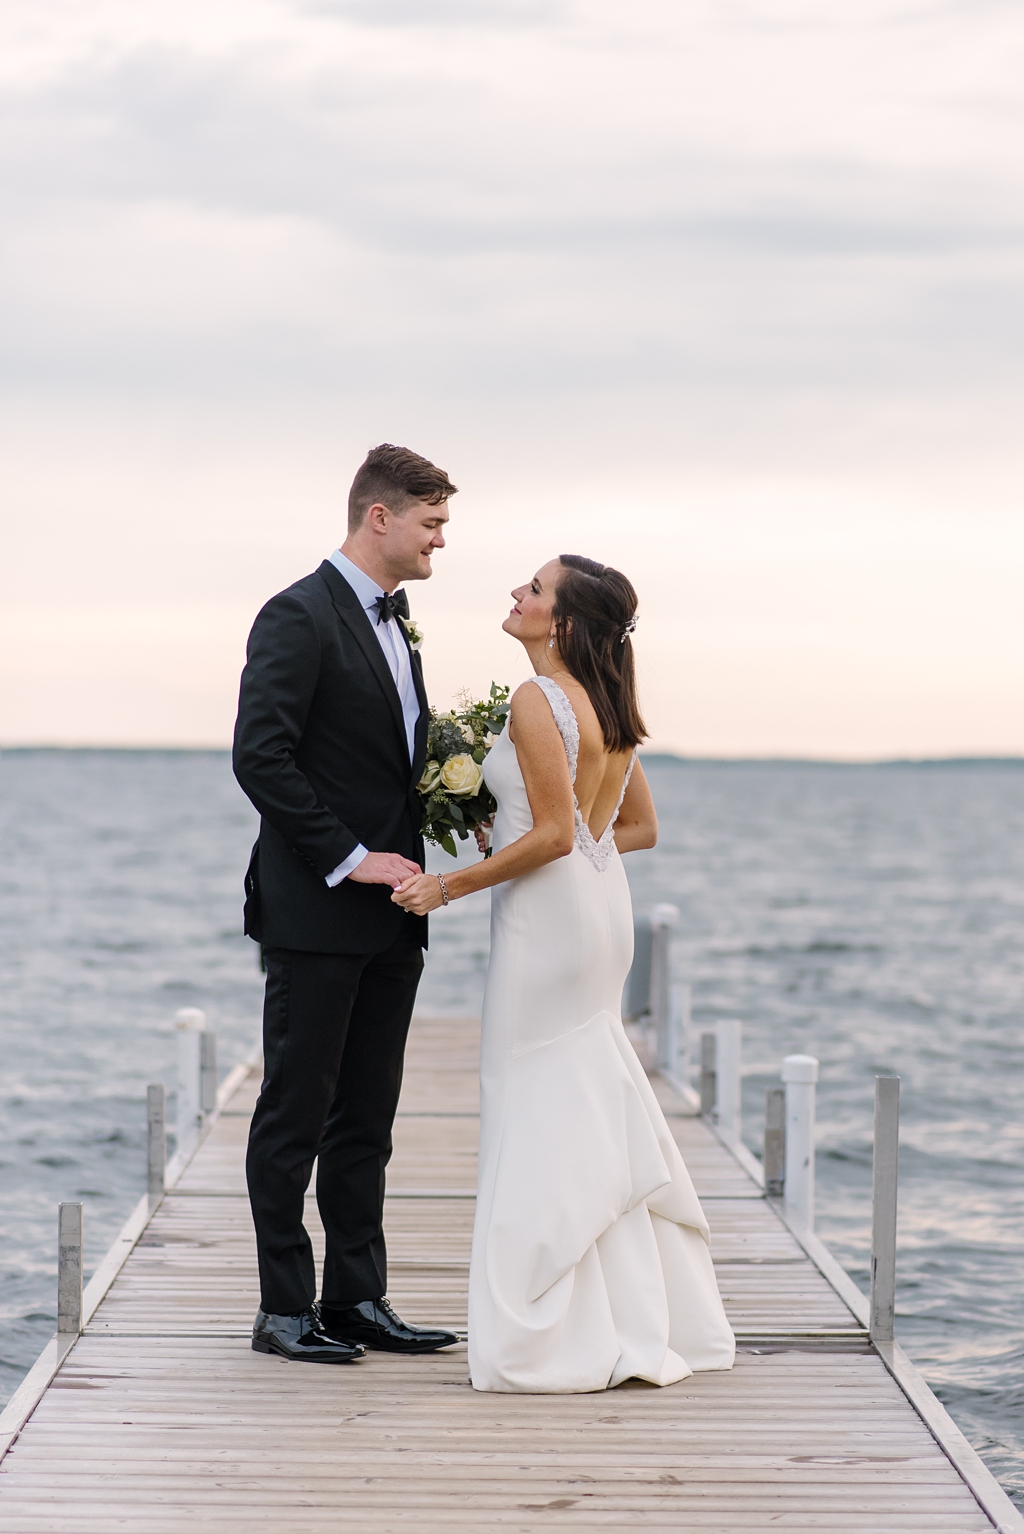 bride and groom smile at each other on lake dock